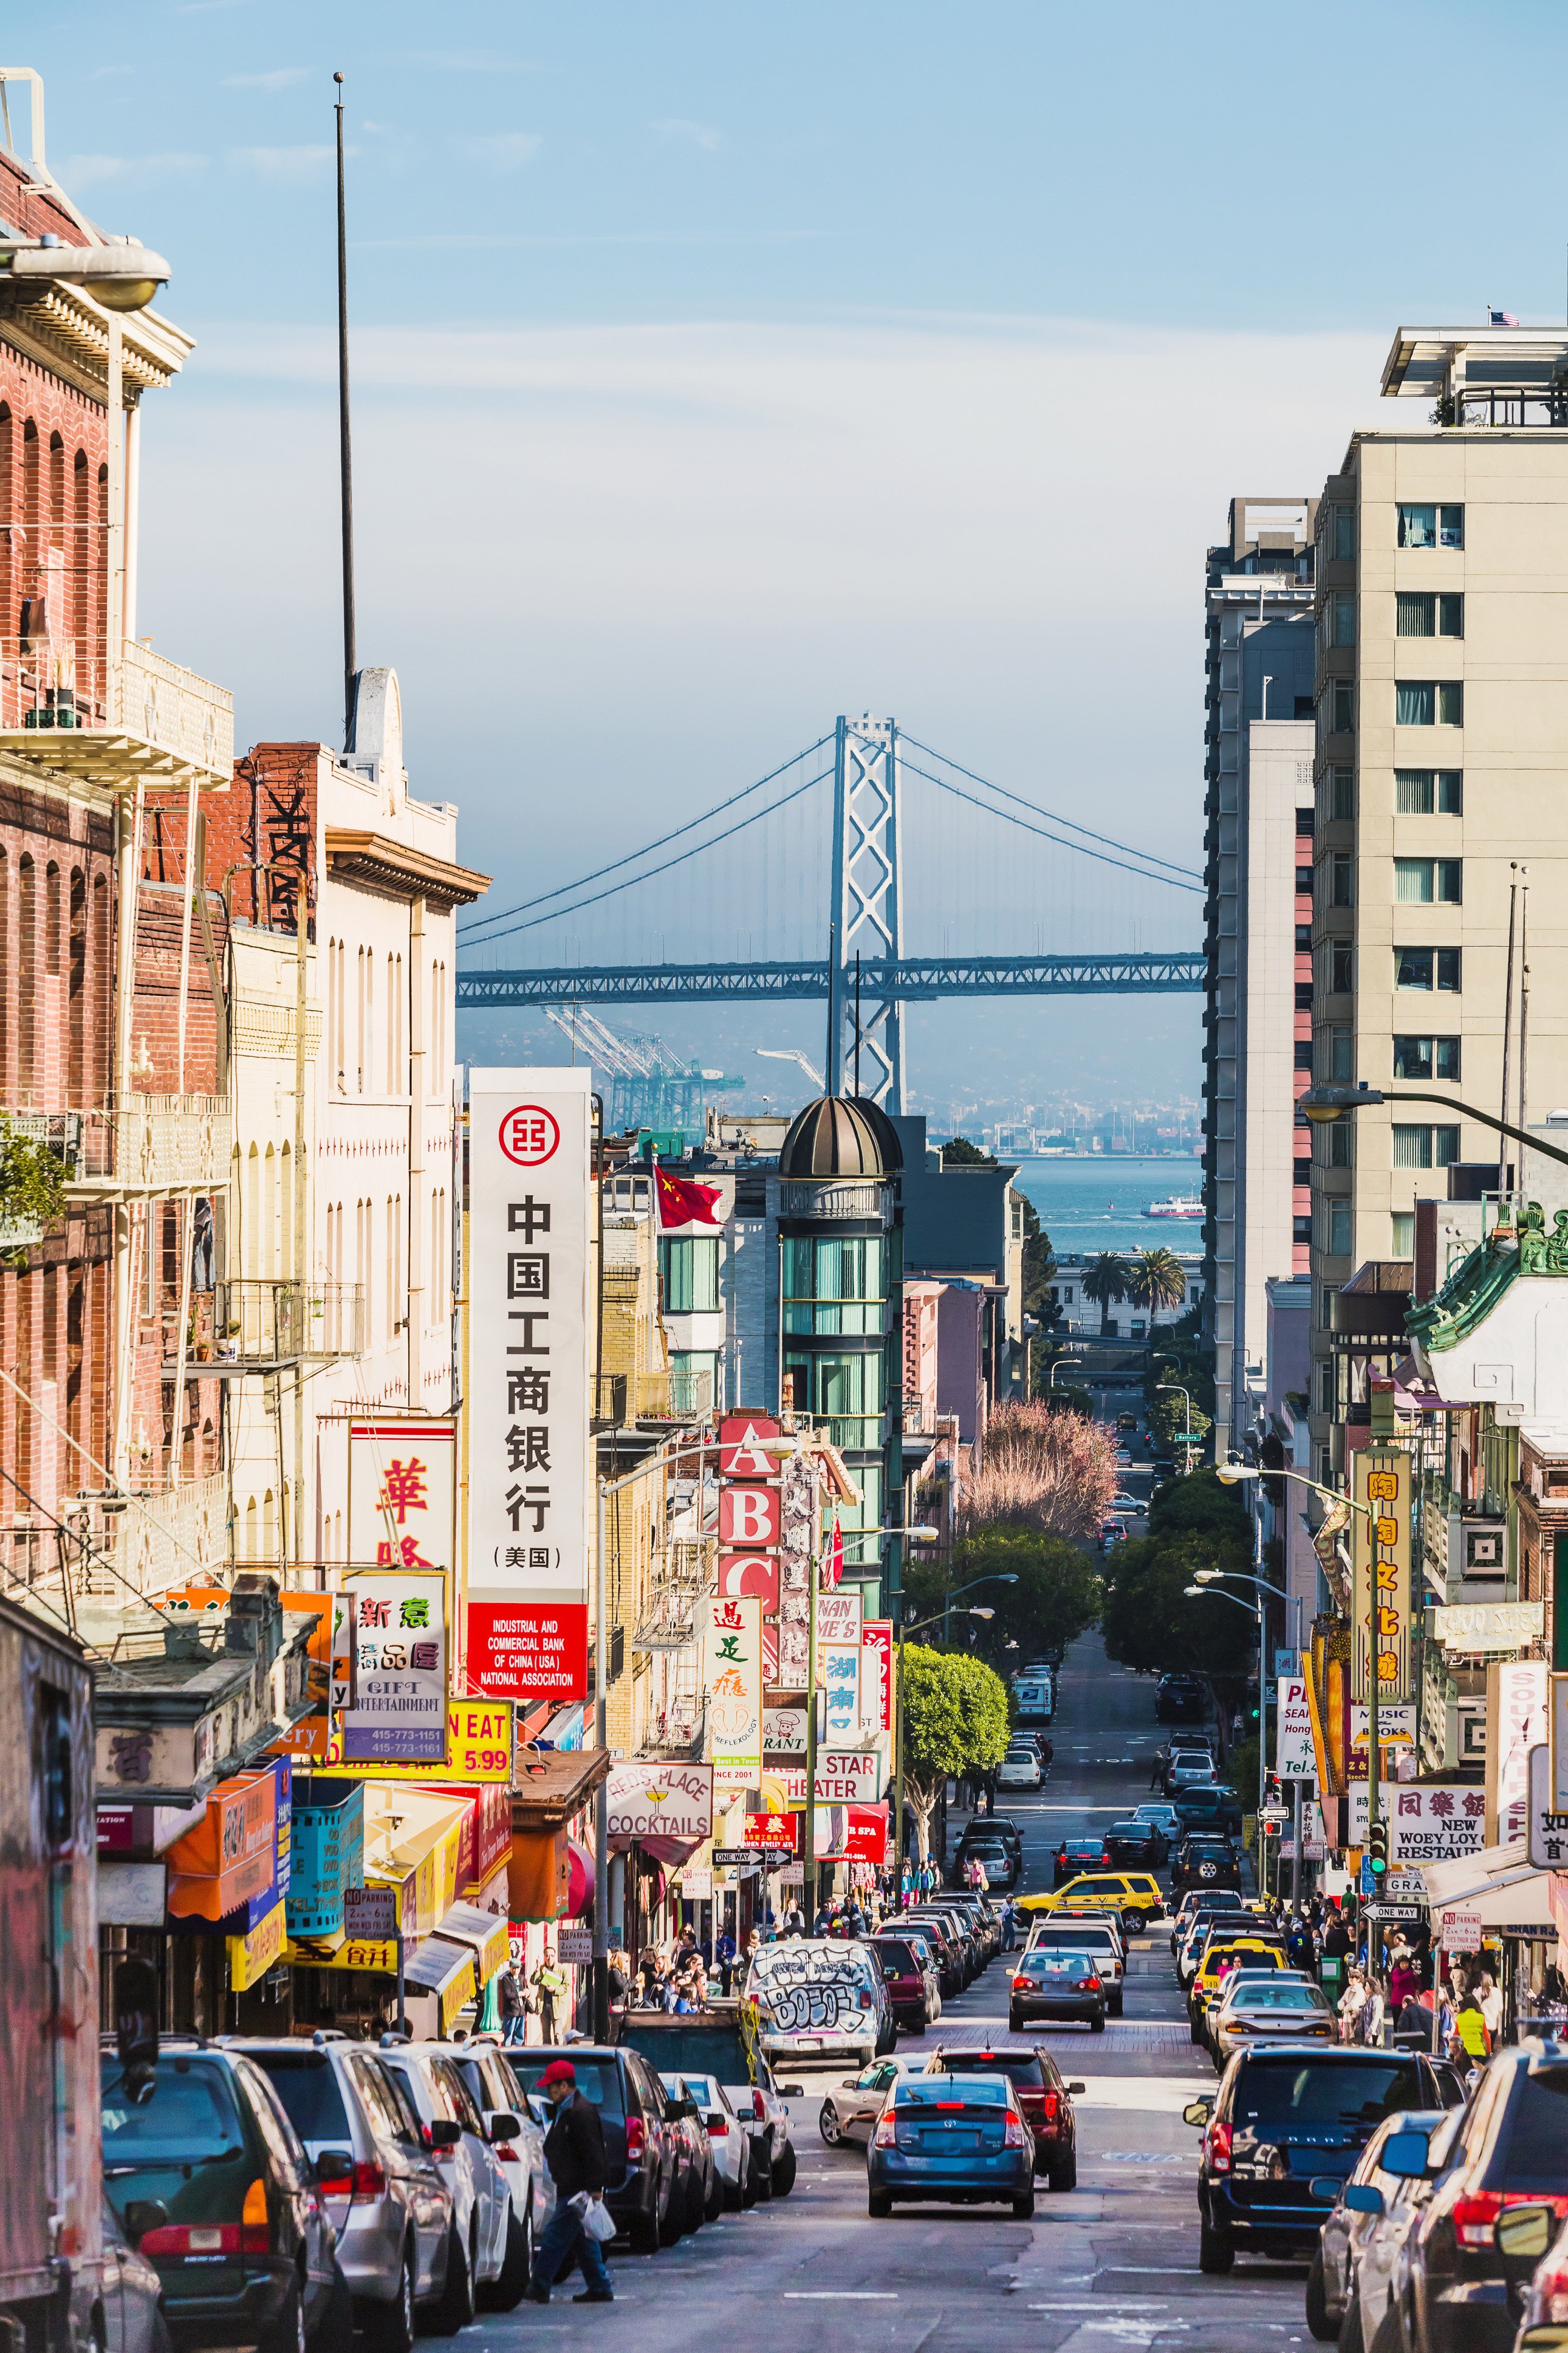 San Francisco’s Chinatown. The Six Companies association was once a key agency for residents there, but has declined in influence. Photo: Getty